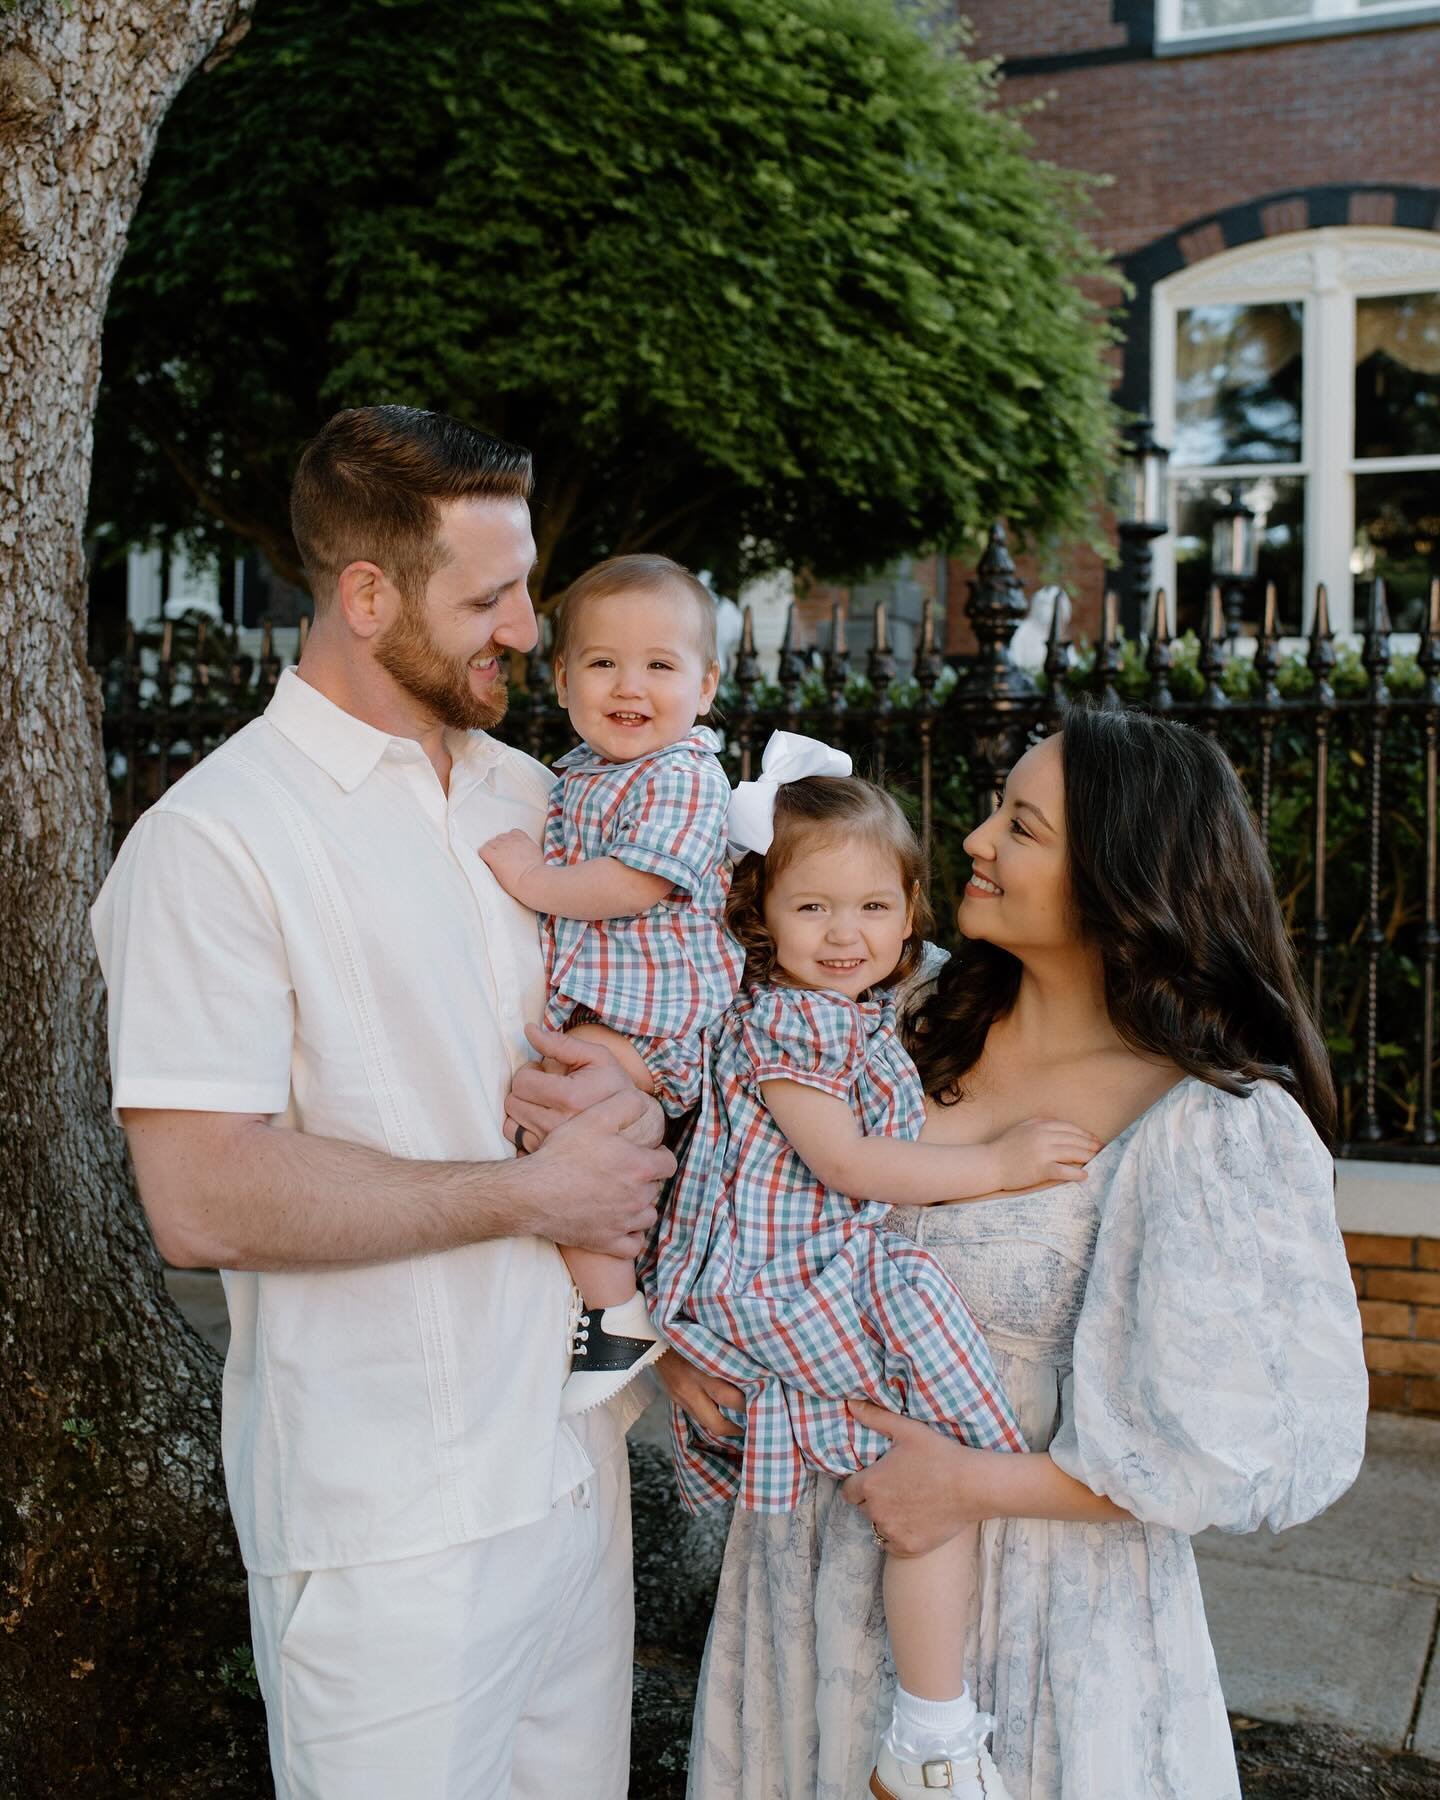 A beautiful Charleston morning with the Satterfield family 🥹 the little matching outfits are everything to me!